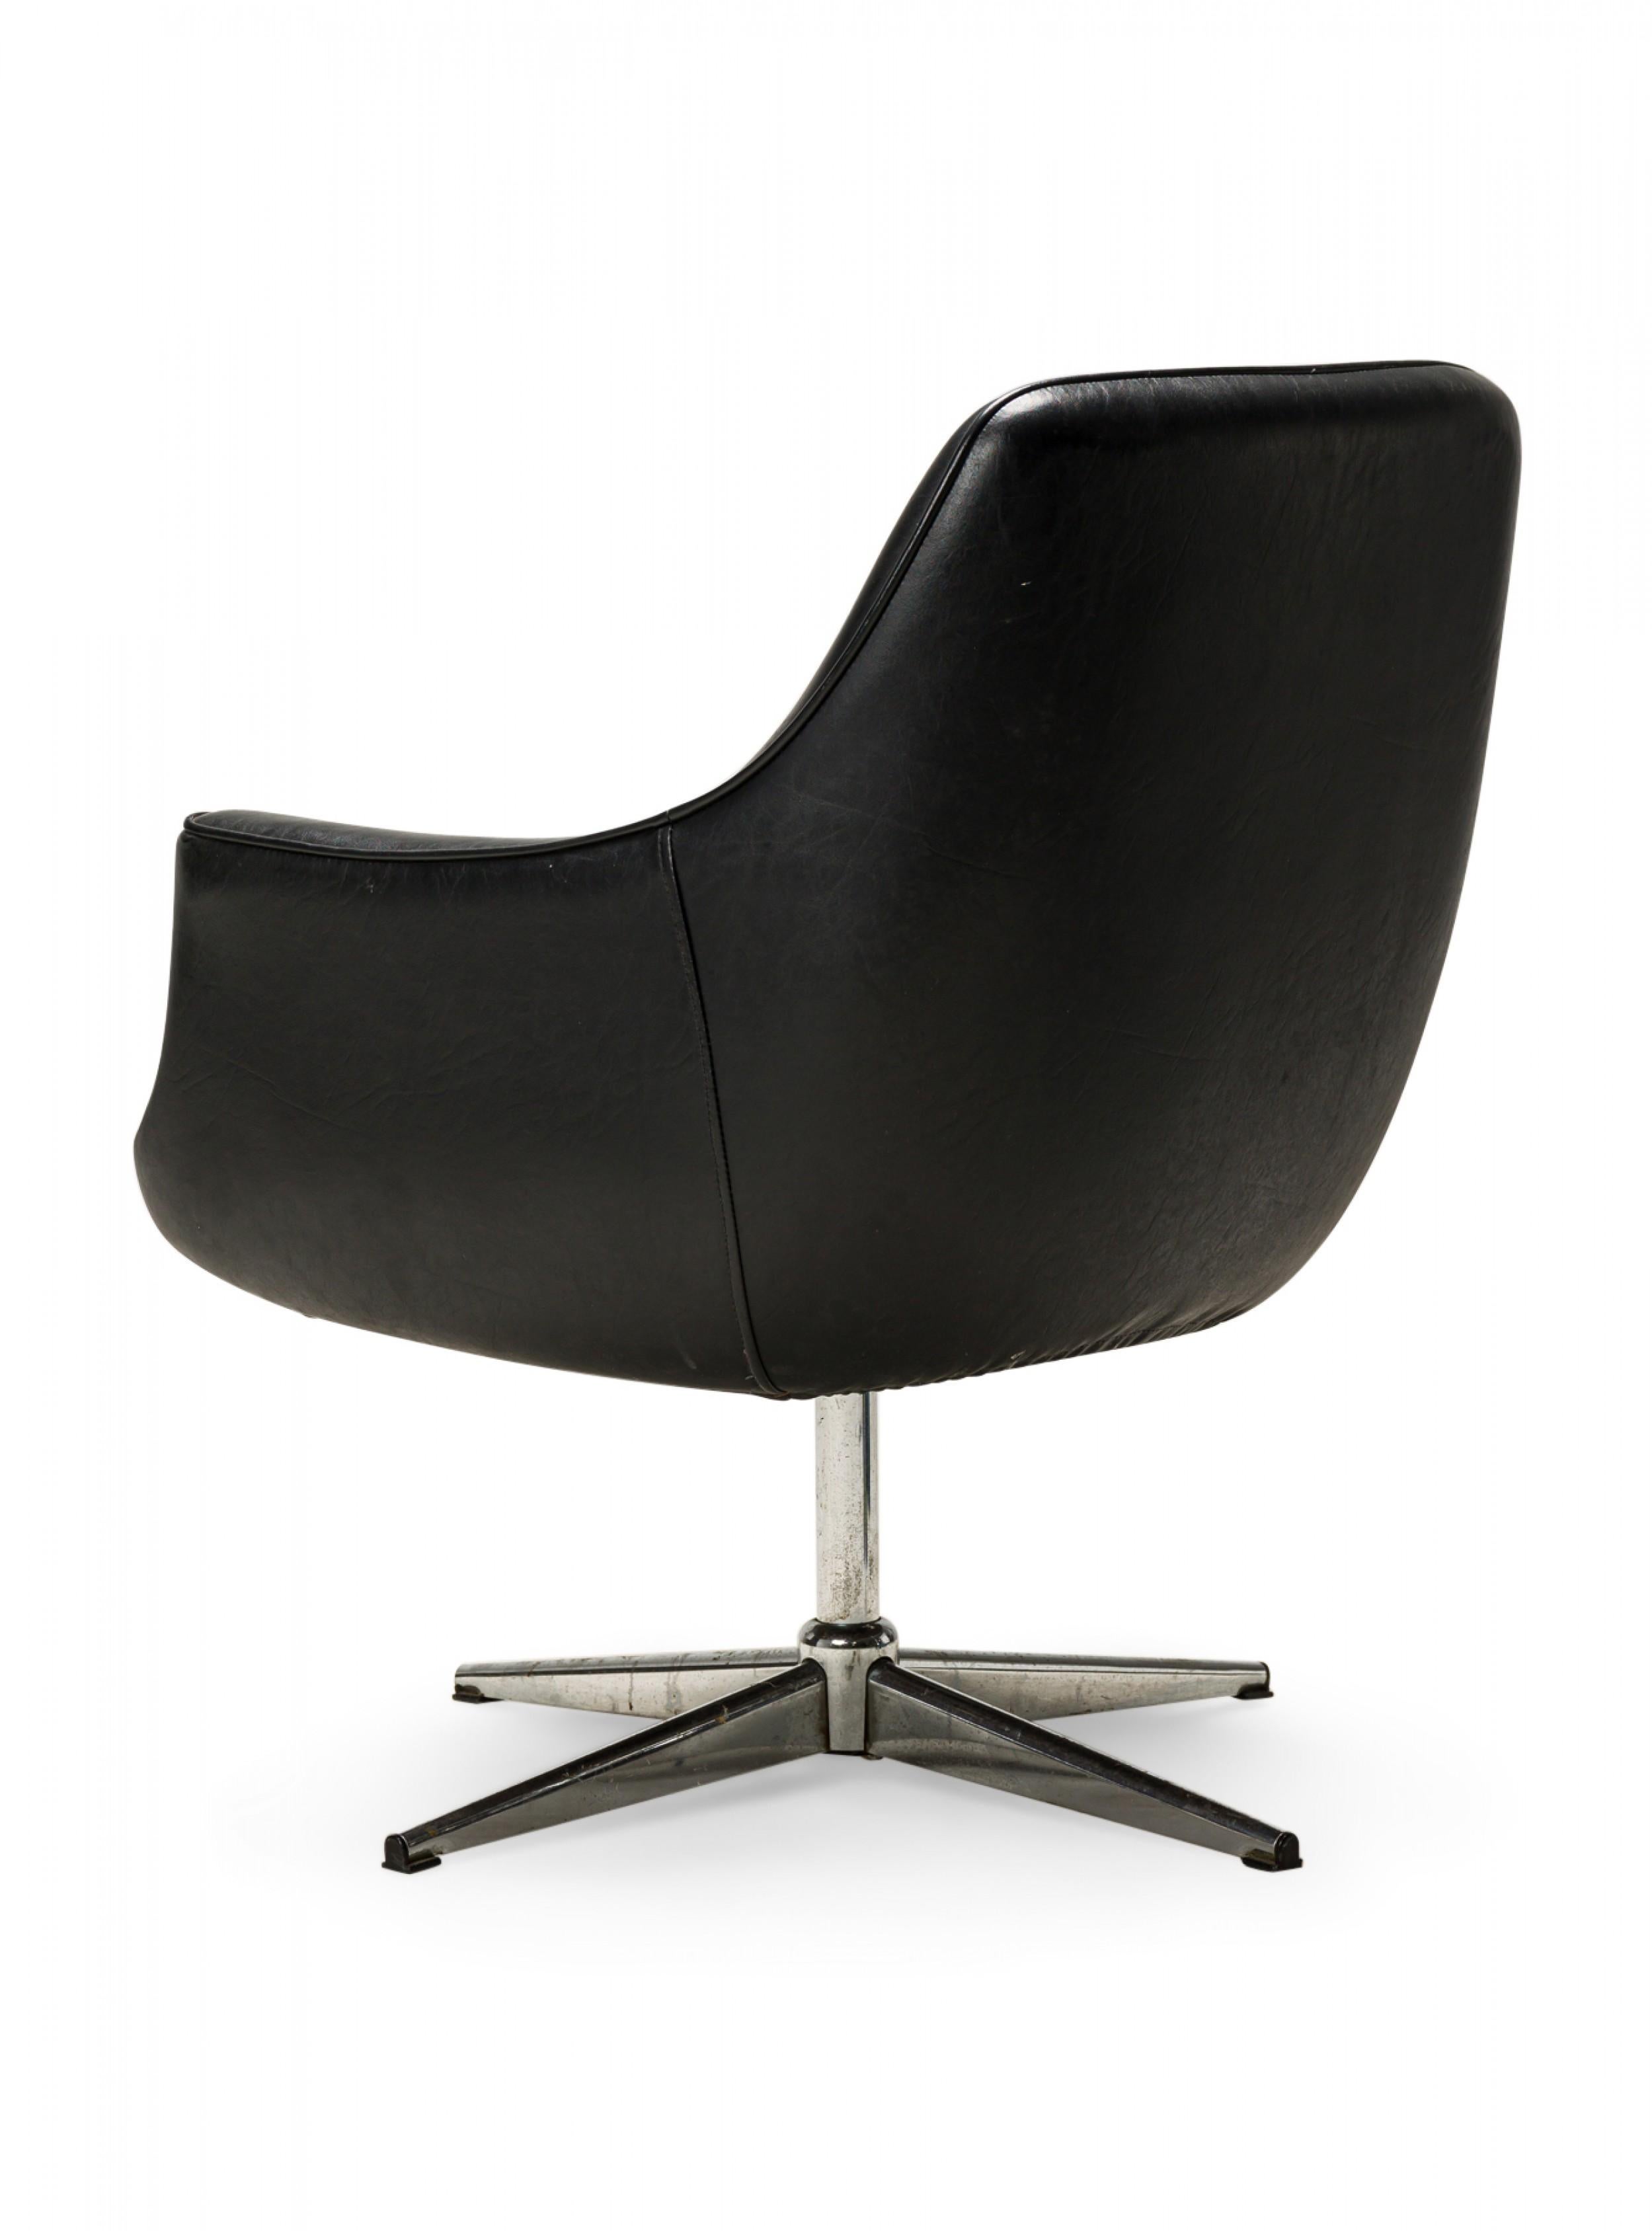 Overman Swedish Black Leather and Chrome Swivel Armchair In Good Condition For Sale In New York, NY